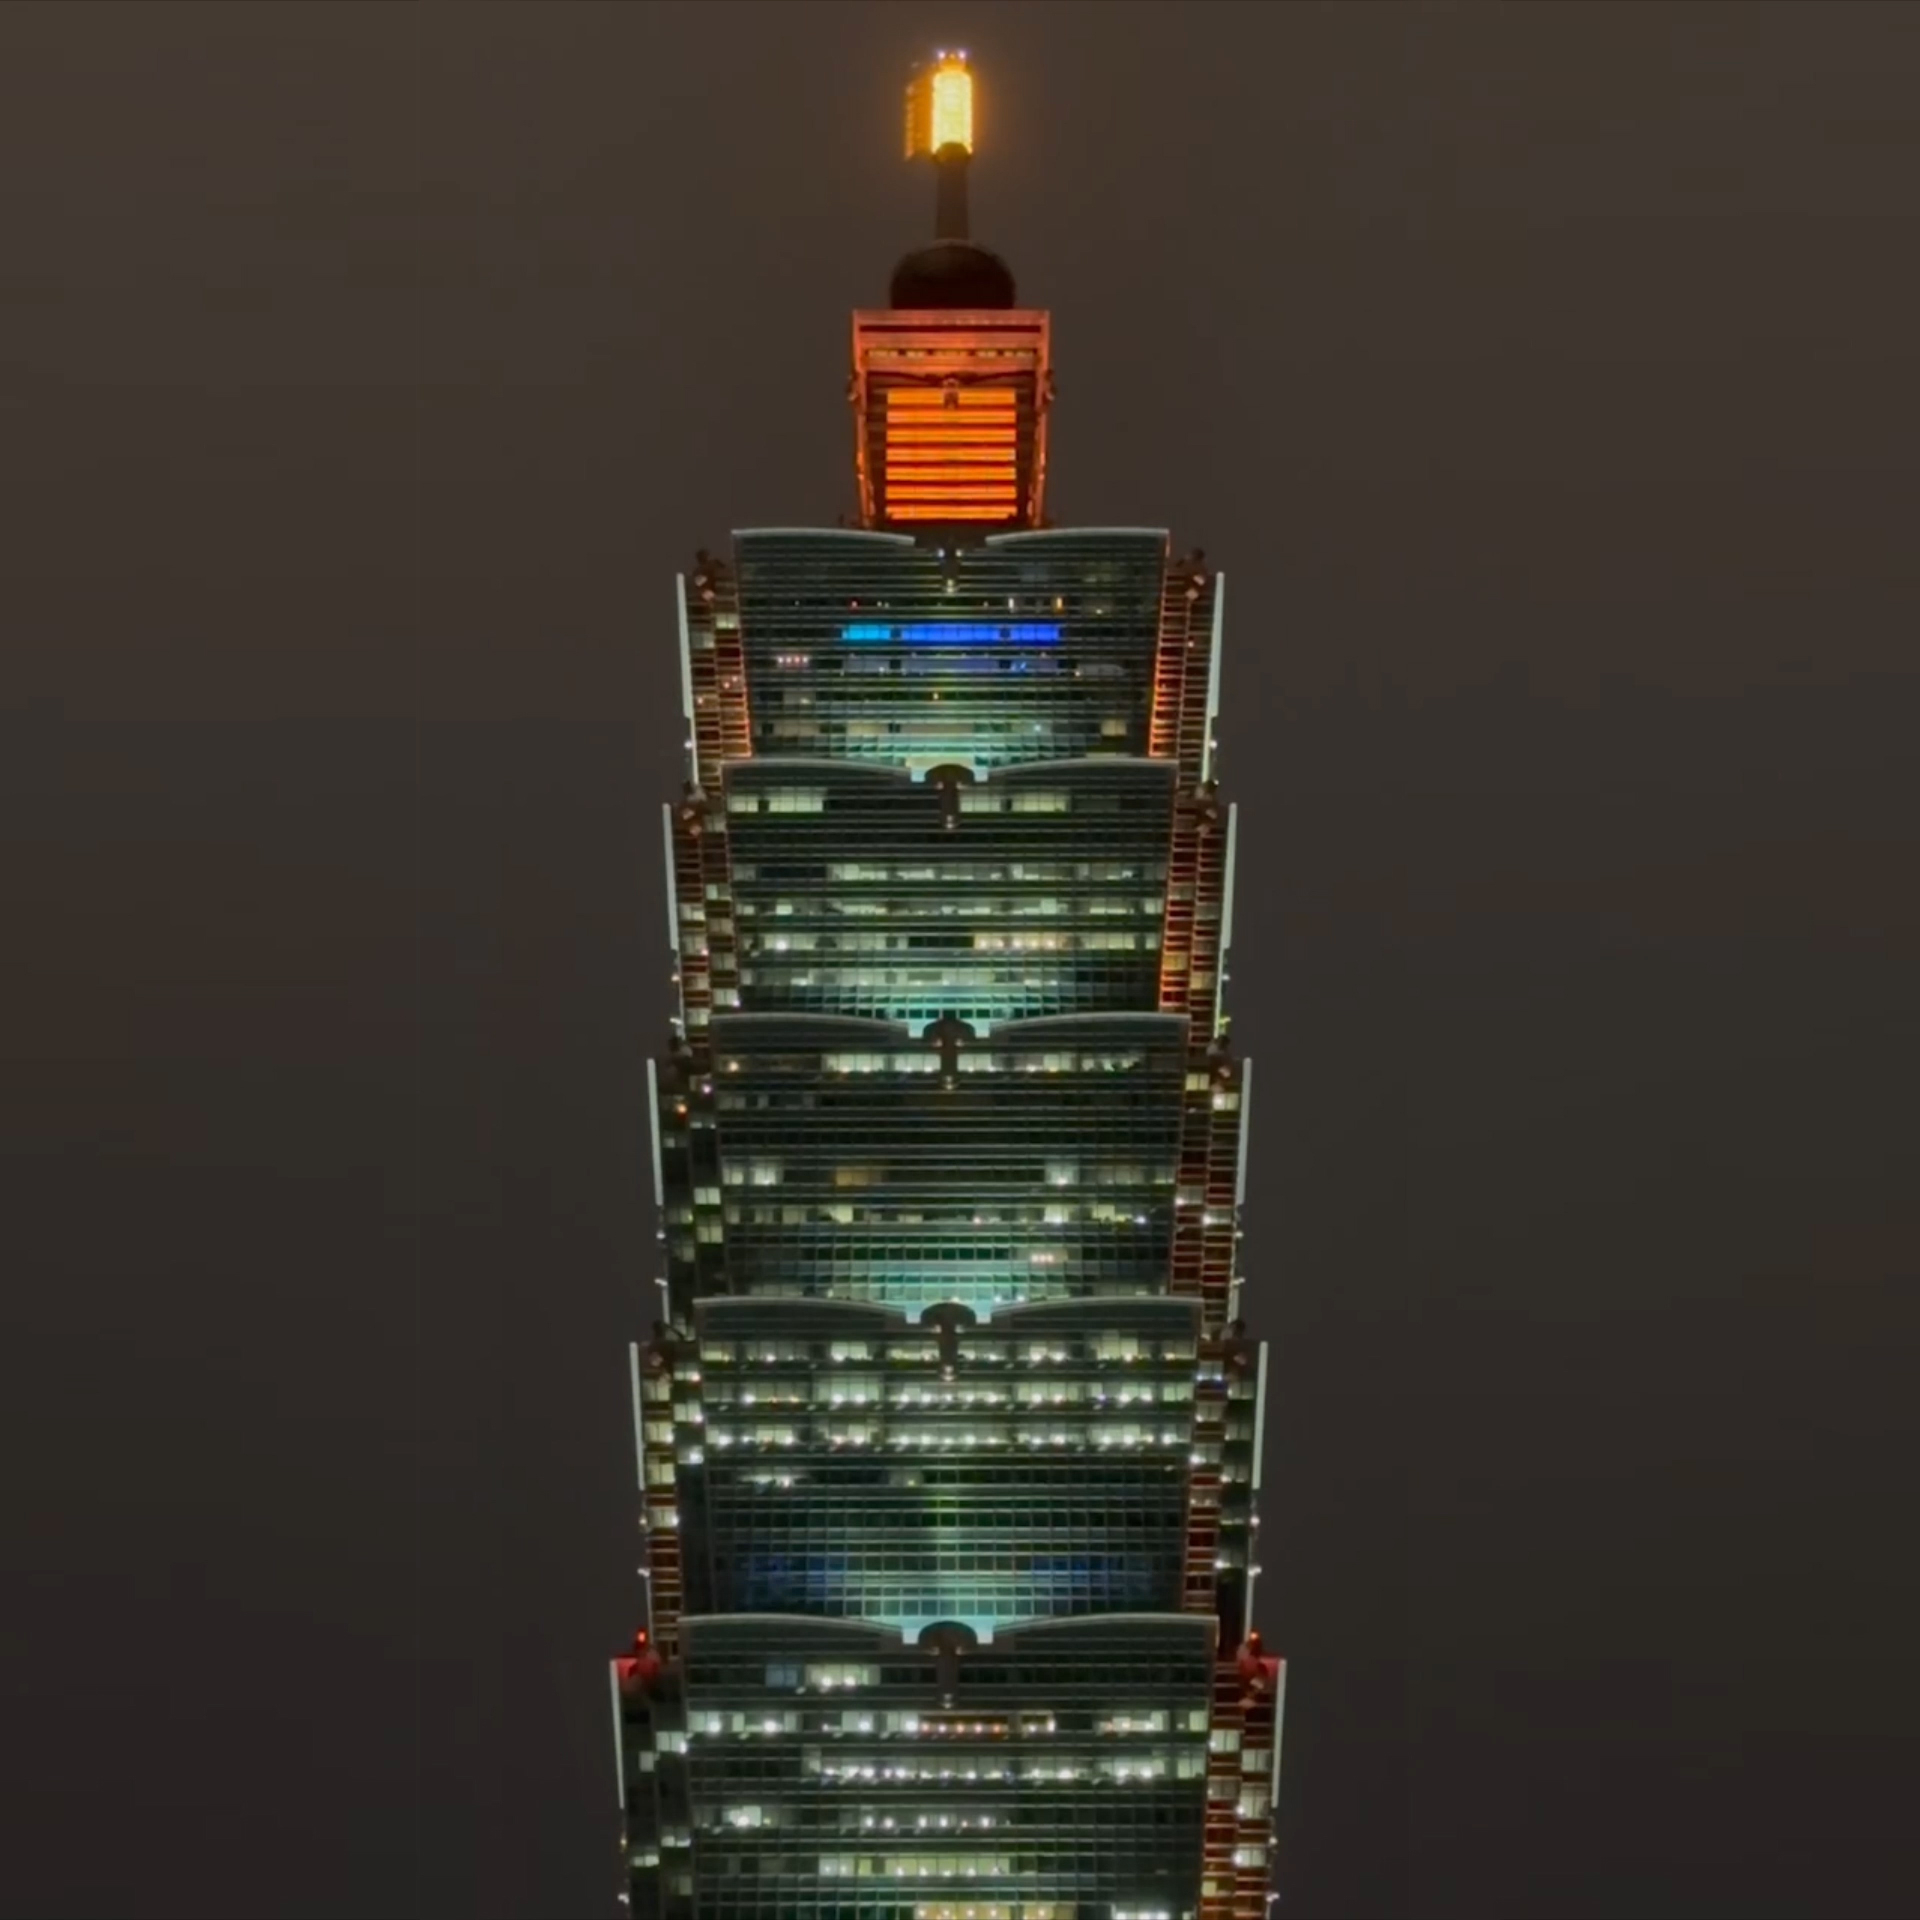 Shining Bright atop Taipei 101, GIGABYTE Redefines AI Evolution Accelerated by Next-Generation Computing at COMPUTEX